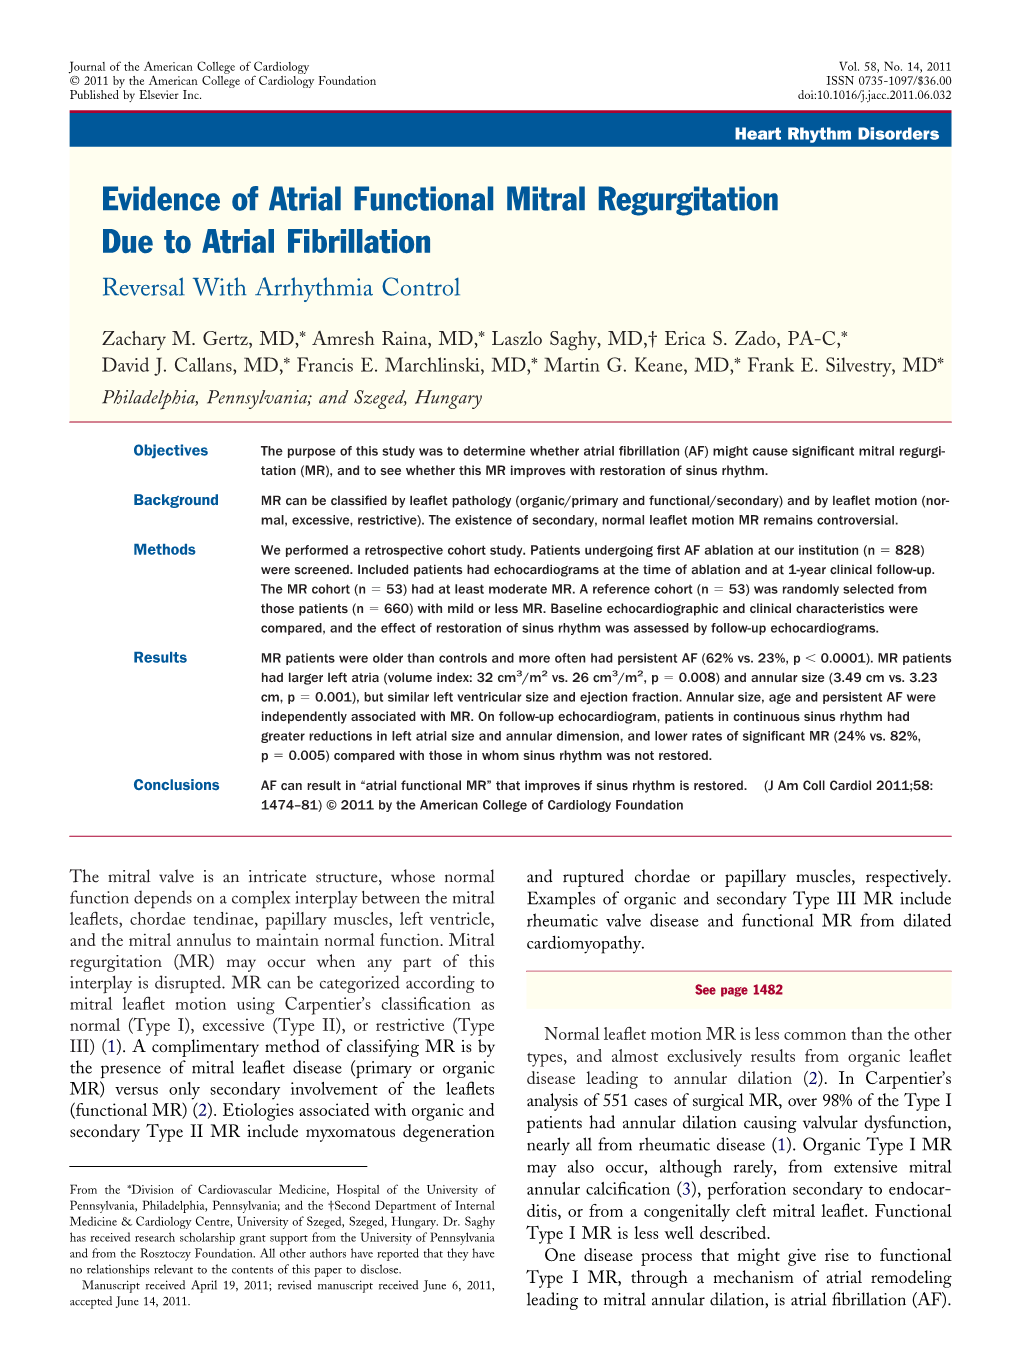 Evidence of Atrial Functional Mitral Regurgitation Due to Atrial Fibrillation Reversal with Arrhythmia Control